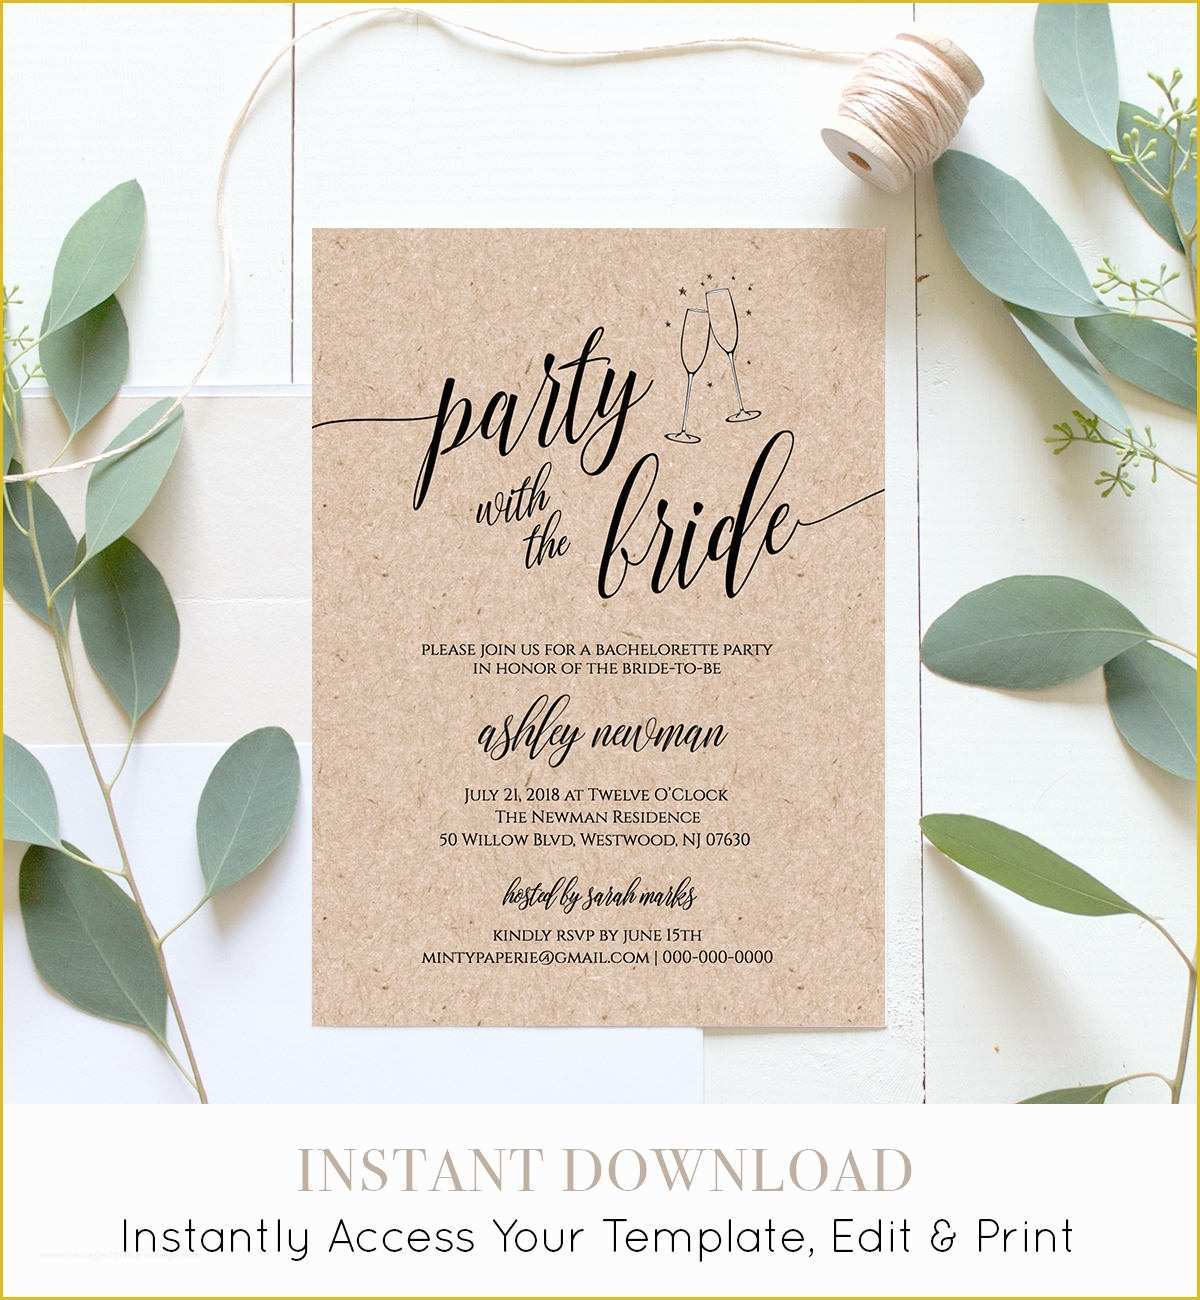 Free Online Bachelorette Party Invitations Templates Of Bachelorette Party Invitation & Itinerary Printable